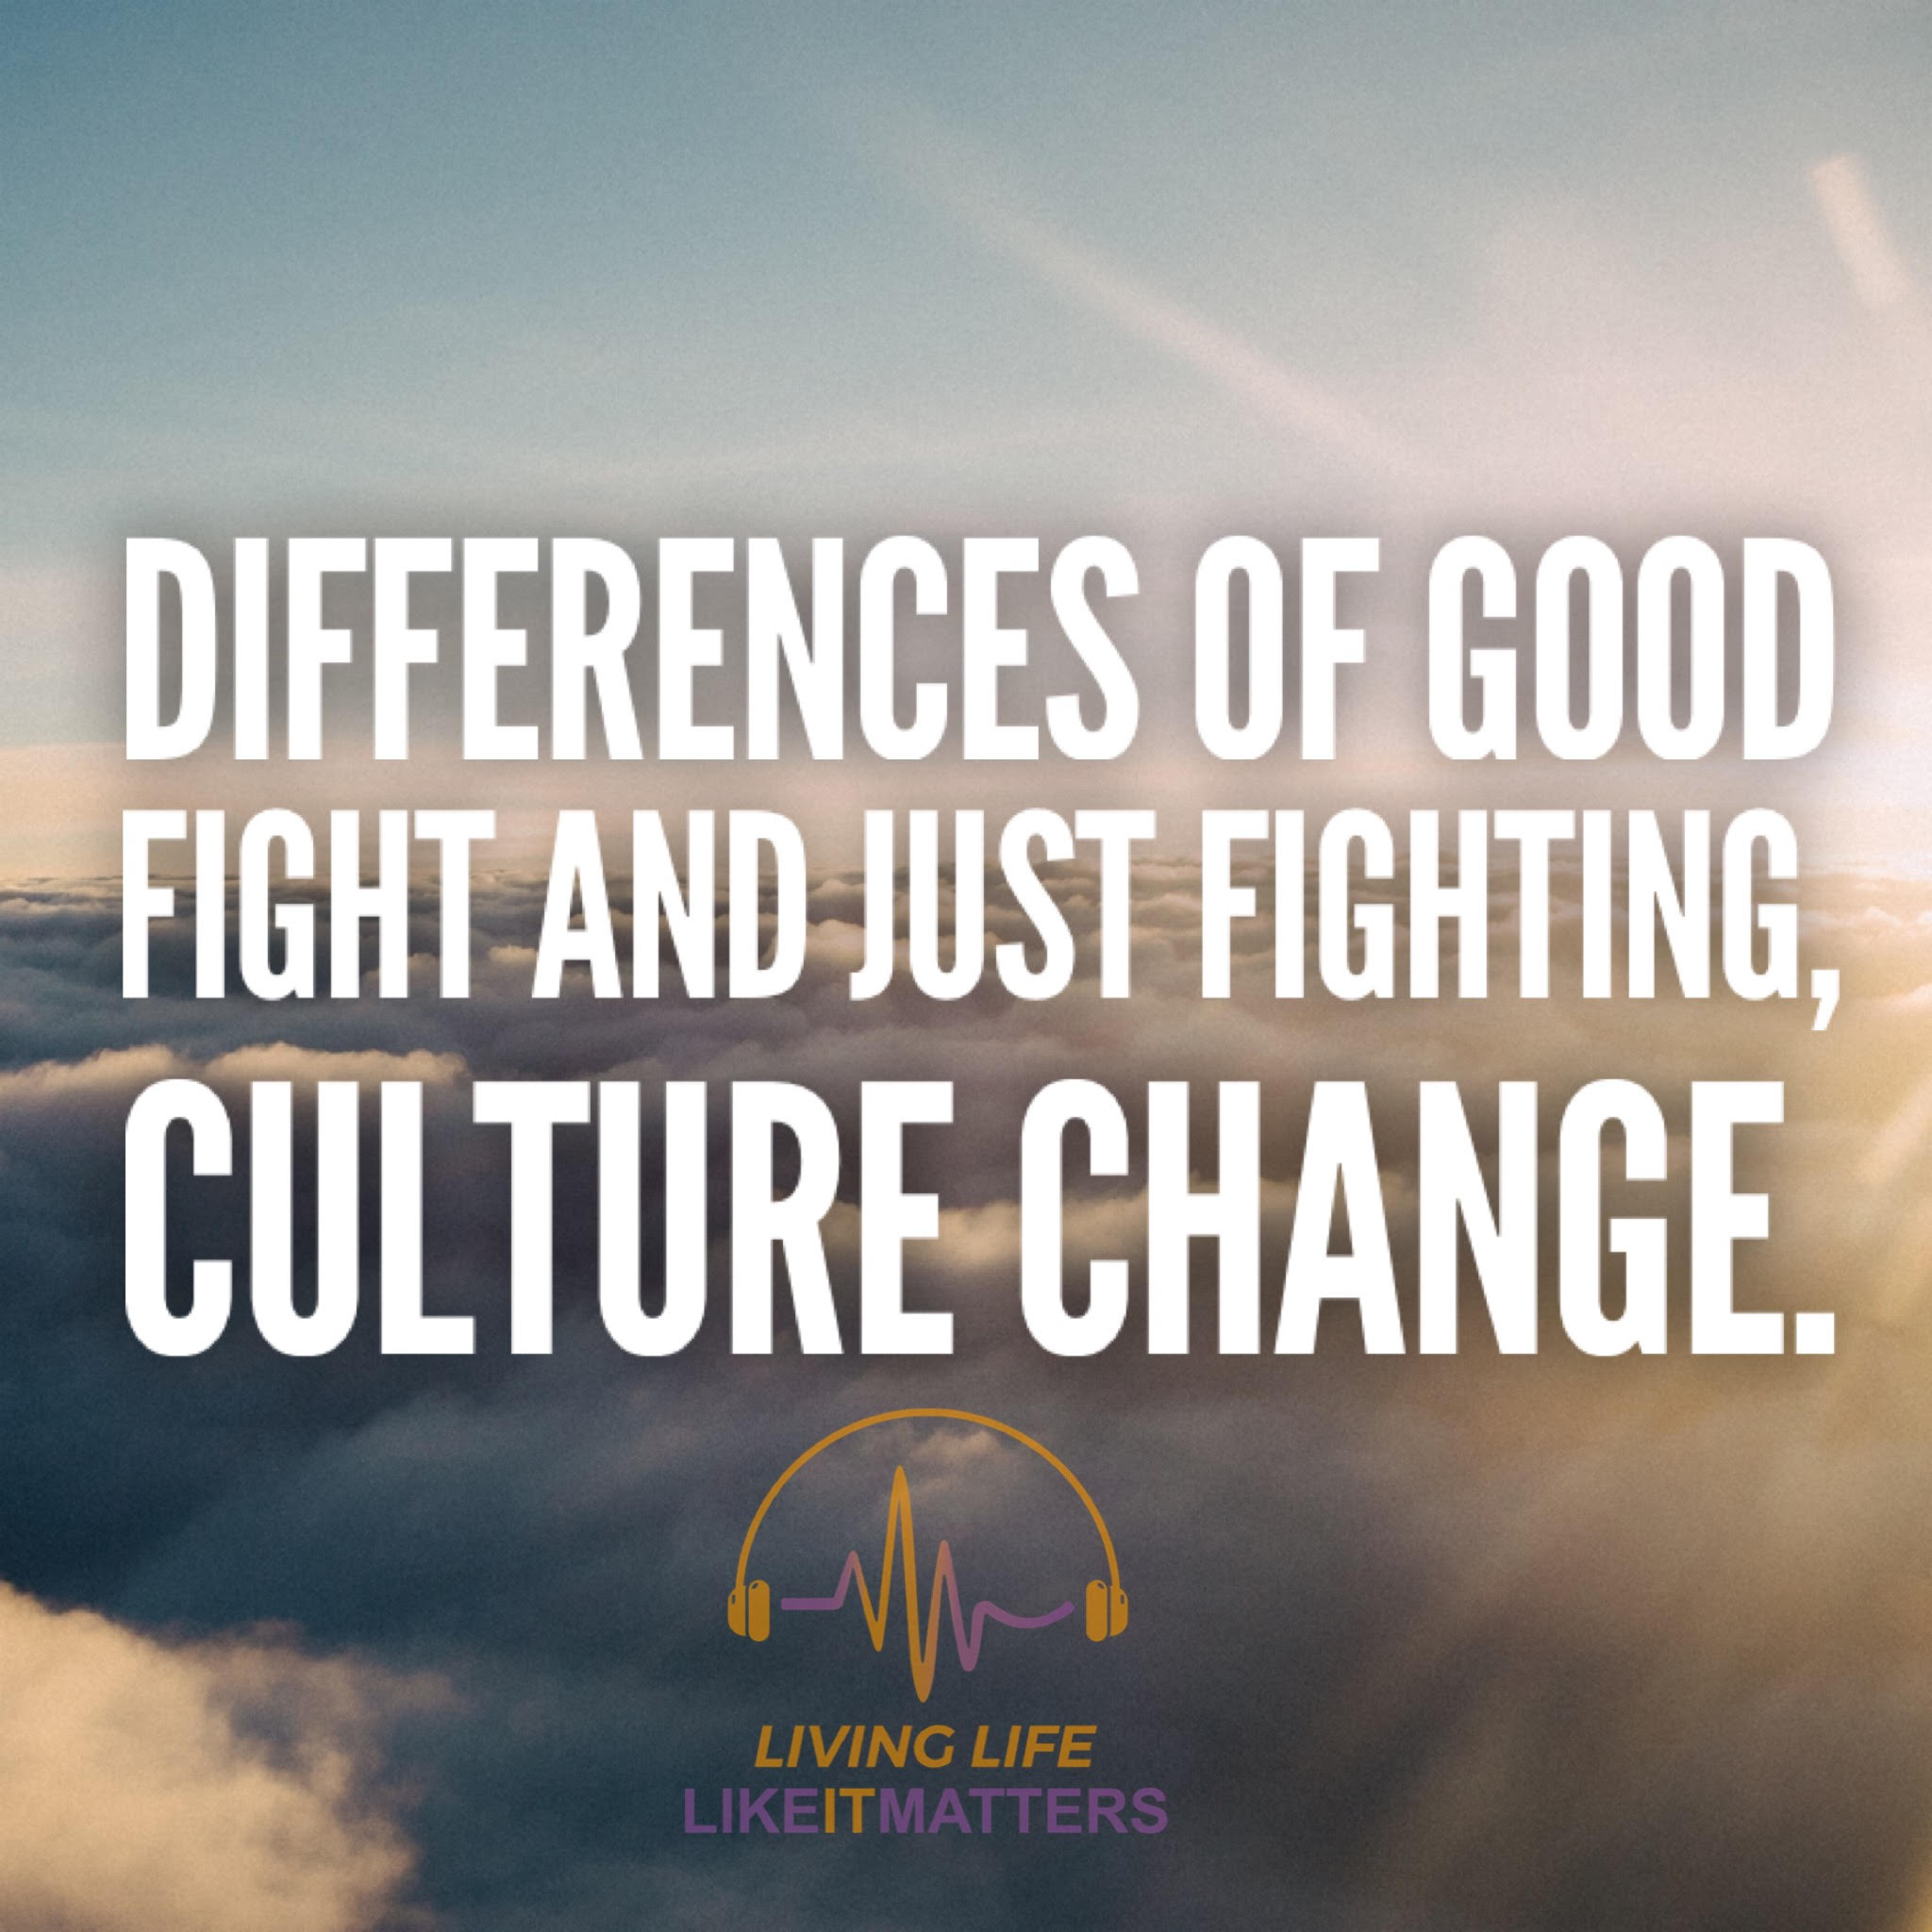 Differences of Good Fight and Just Fighting, Culture Change.